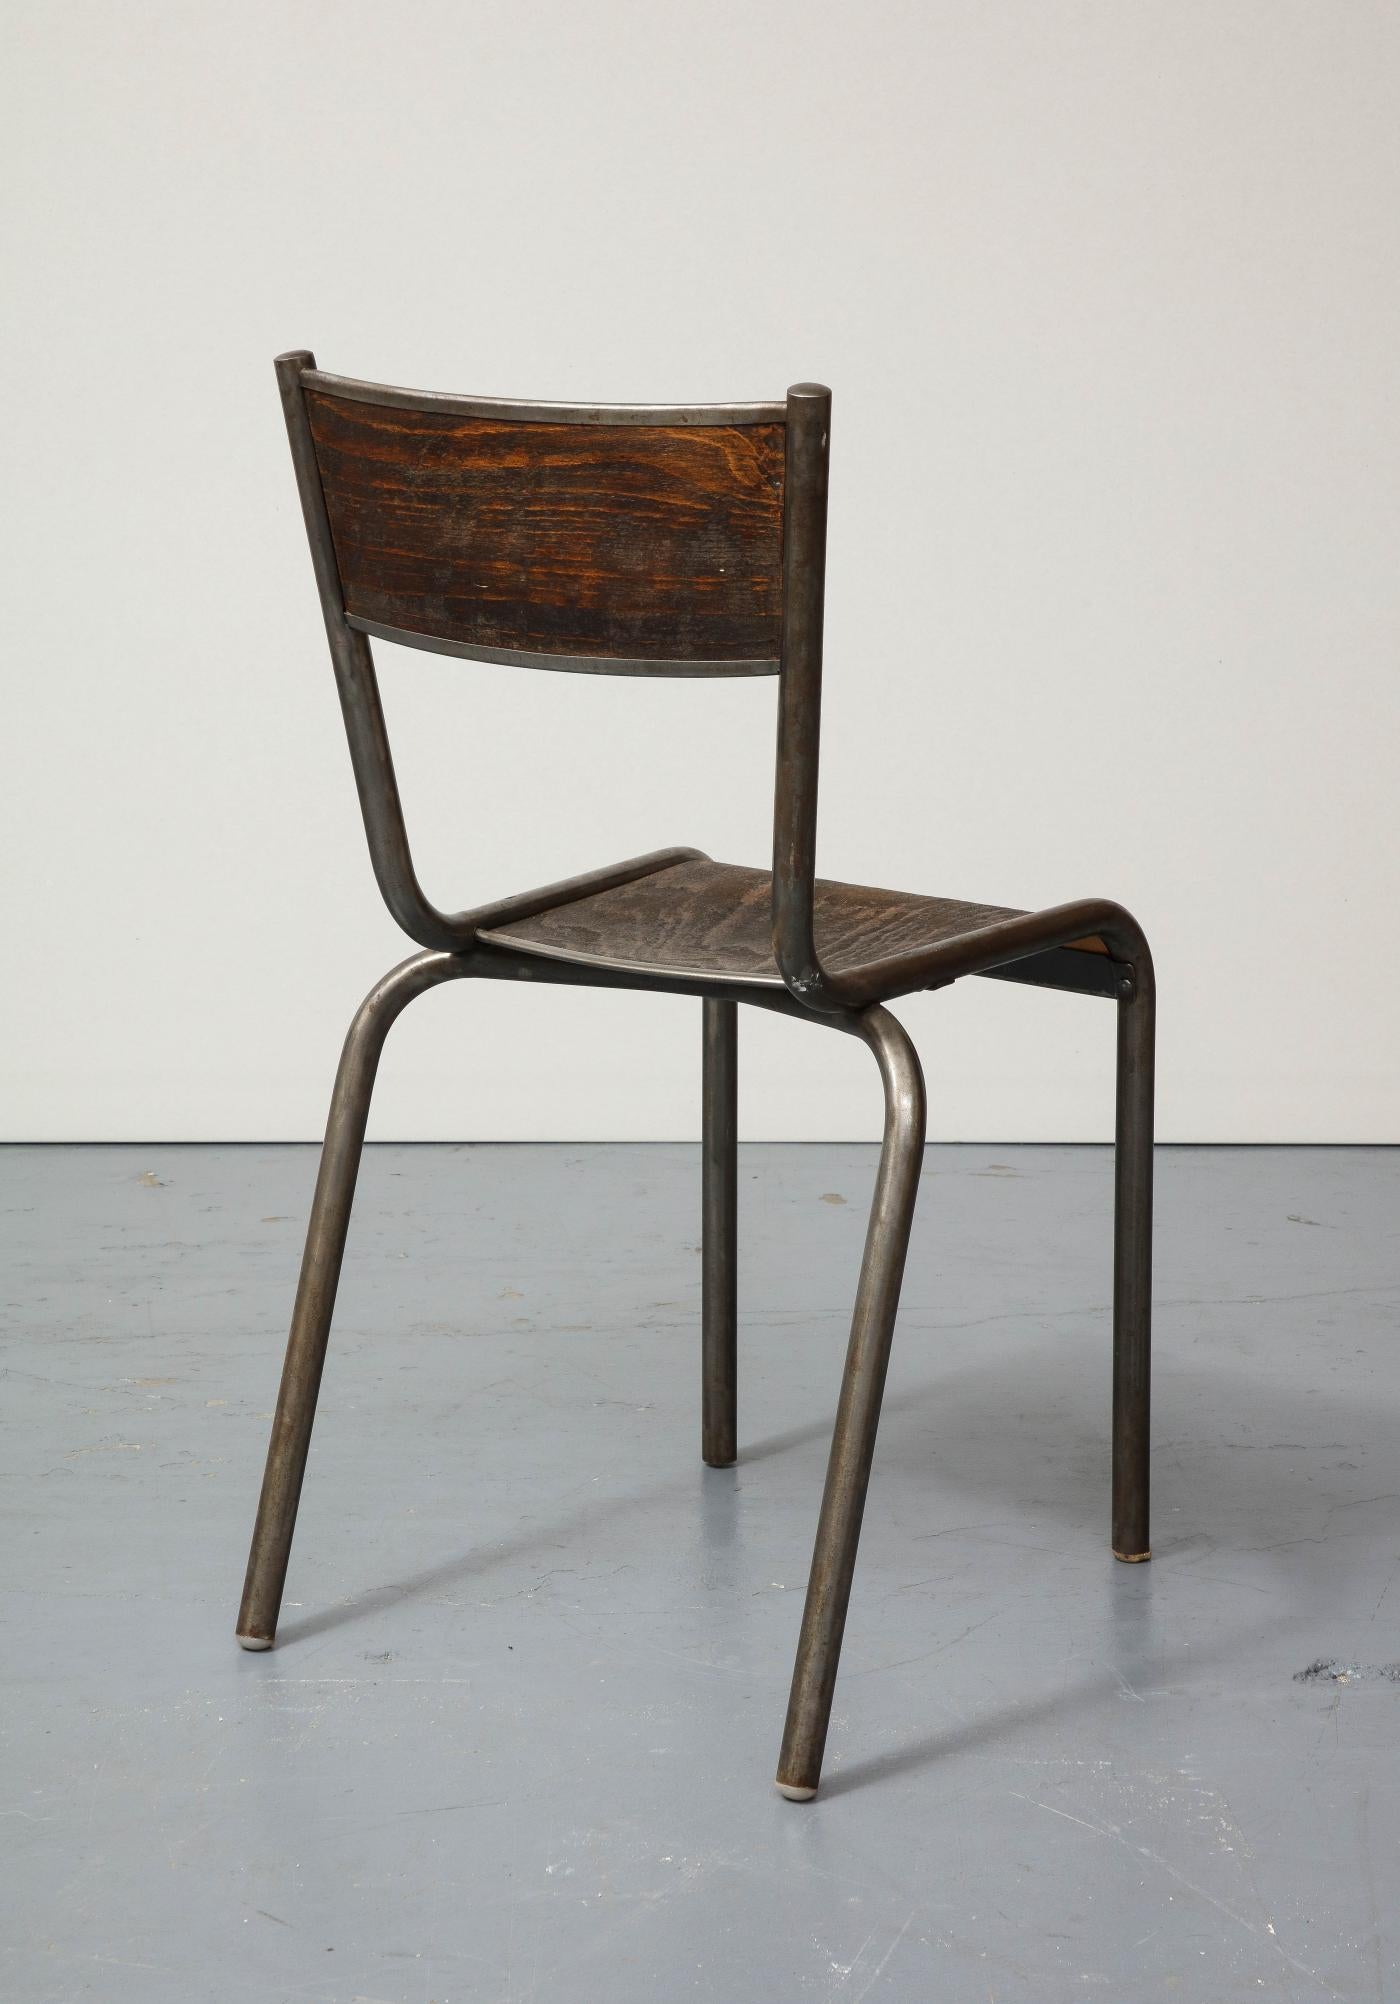 Polished Steel and Bentwood Chair, France, c. 1940

Rustic, beautifully patinated chair with tubular steel and bent wood.

Additional Information:
Materials: Steel, Bent Wood
Origin: France
Period: 1920-1949
Creation Date: c.1940
Styles / Movements: